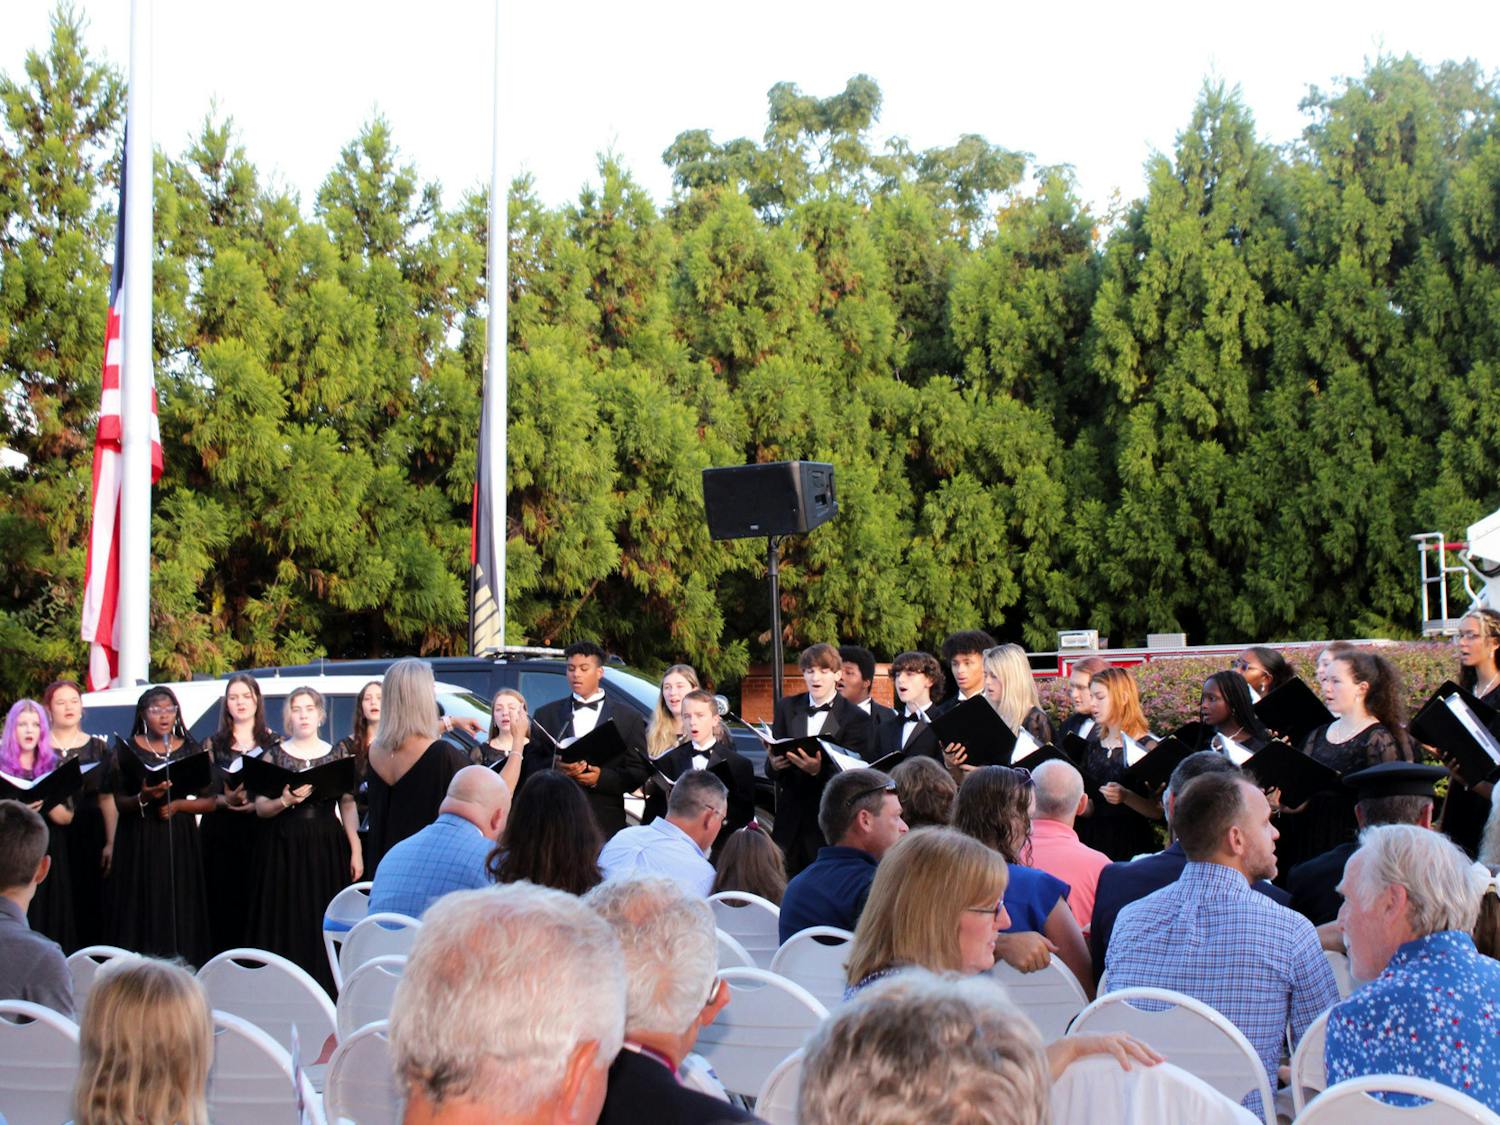 A choir performs at the remembrance ceremony on the 21st anniversary of 9/11 on Sept. 11, 2022 at the Columbia Metropolitan Convention Center. The 9/11 Remembrance Foundation of South Carolina held invited guests and veterans to speak in memoriam of the lives lost in relation to the tragedy.